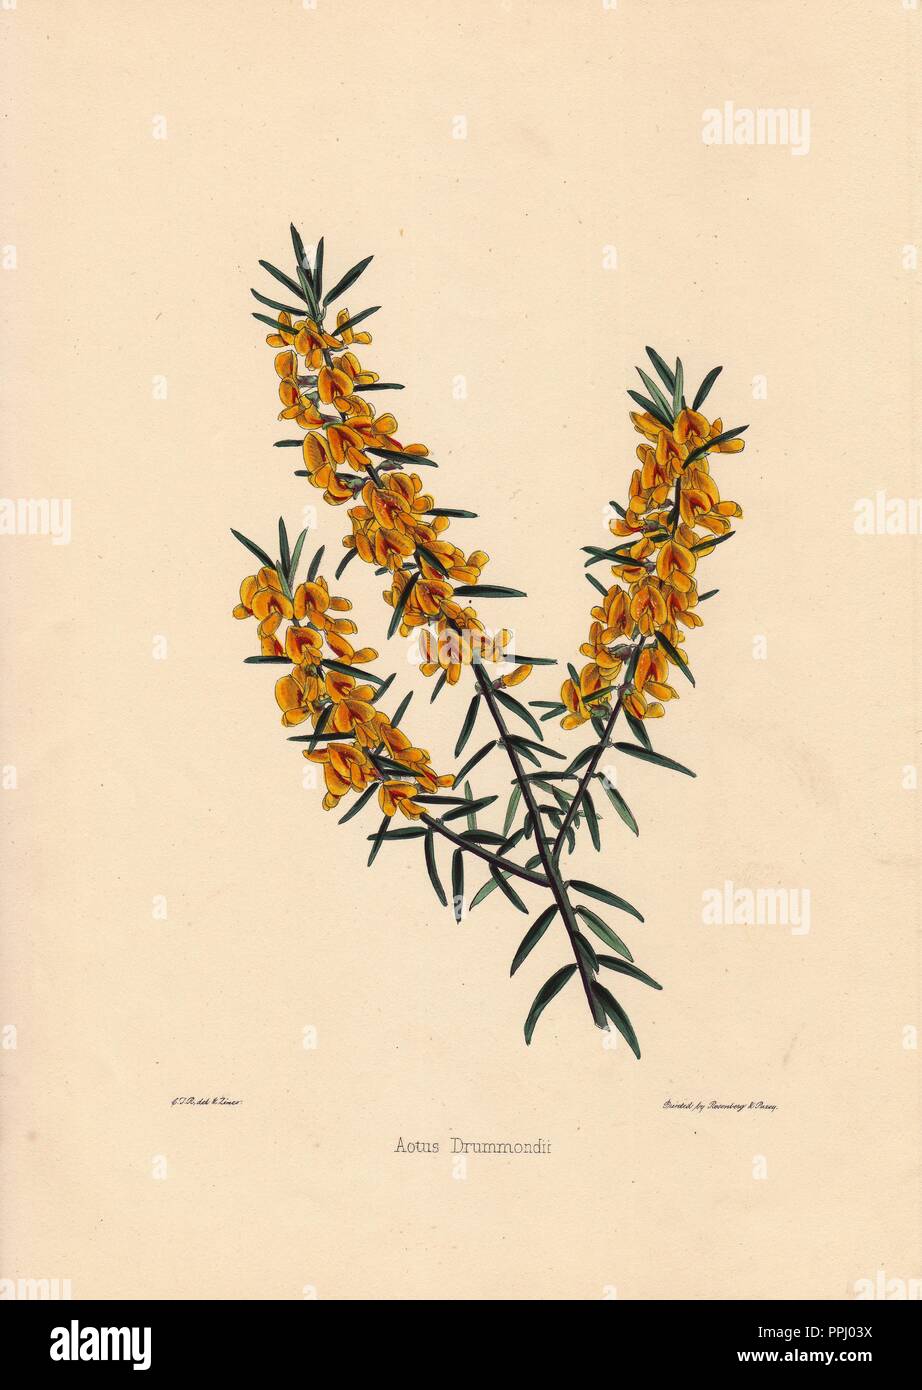 Aotus drummondii. . Yellow and crimson flowered aotus procumbens. Drawn and zincographed by C. T. Rosenberg, for Thomas Moore's 'The Garden Companion and Florists' Guide,' 1852, published by Charles Frederick Cheffins.. . C.T. Rosenberg drew and engraved many botanicals for Moore's 'The Gardener's Magazine of Botany' and W.J. Hooker's 'Curtis's Botanical Magazine' in the middle of the 19th century. Moore (1821-1887) was the curator of the Botanic Garden, Chelsea, from 1847 until his death. Stock Photo